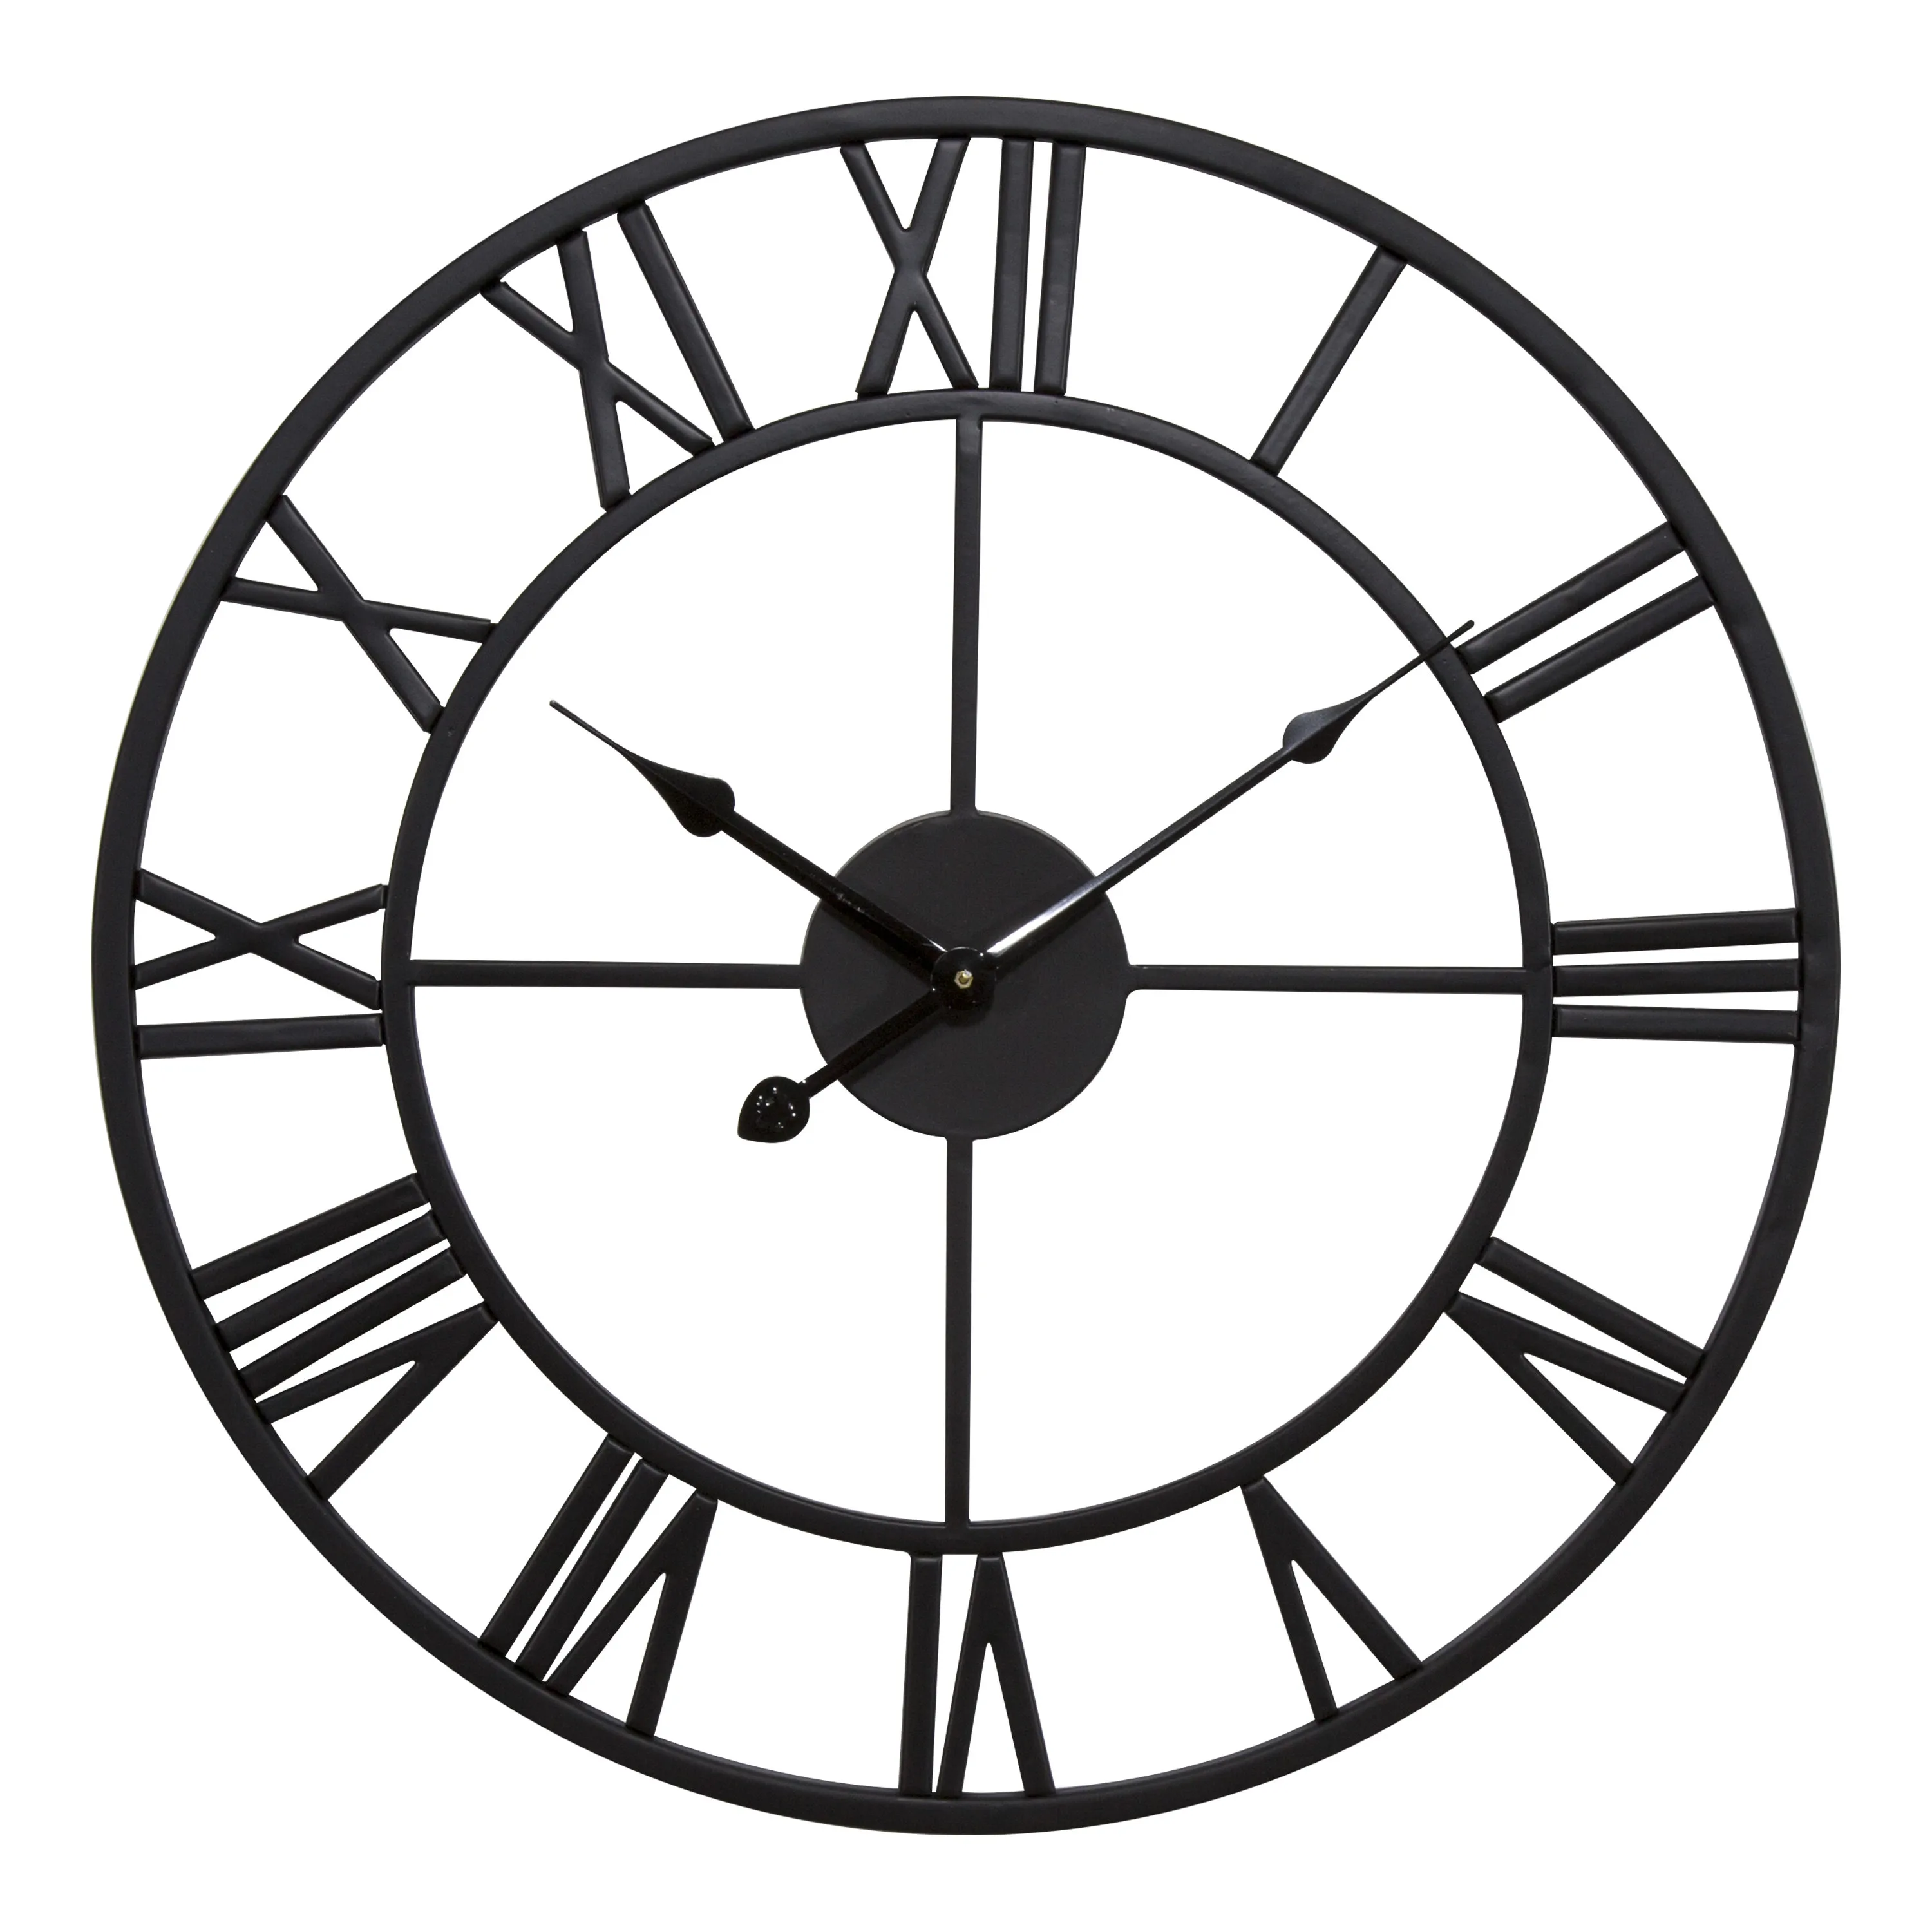 

24INCH 60cm Classic Metal Round Shaped Antique Industrial Iron skeleton Roman Numerals home decor black Wall Clock